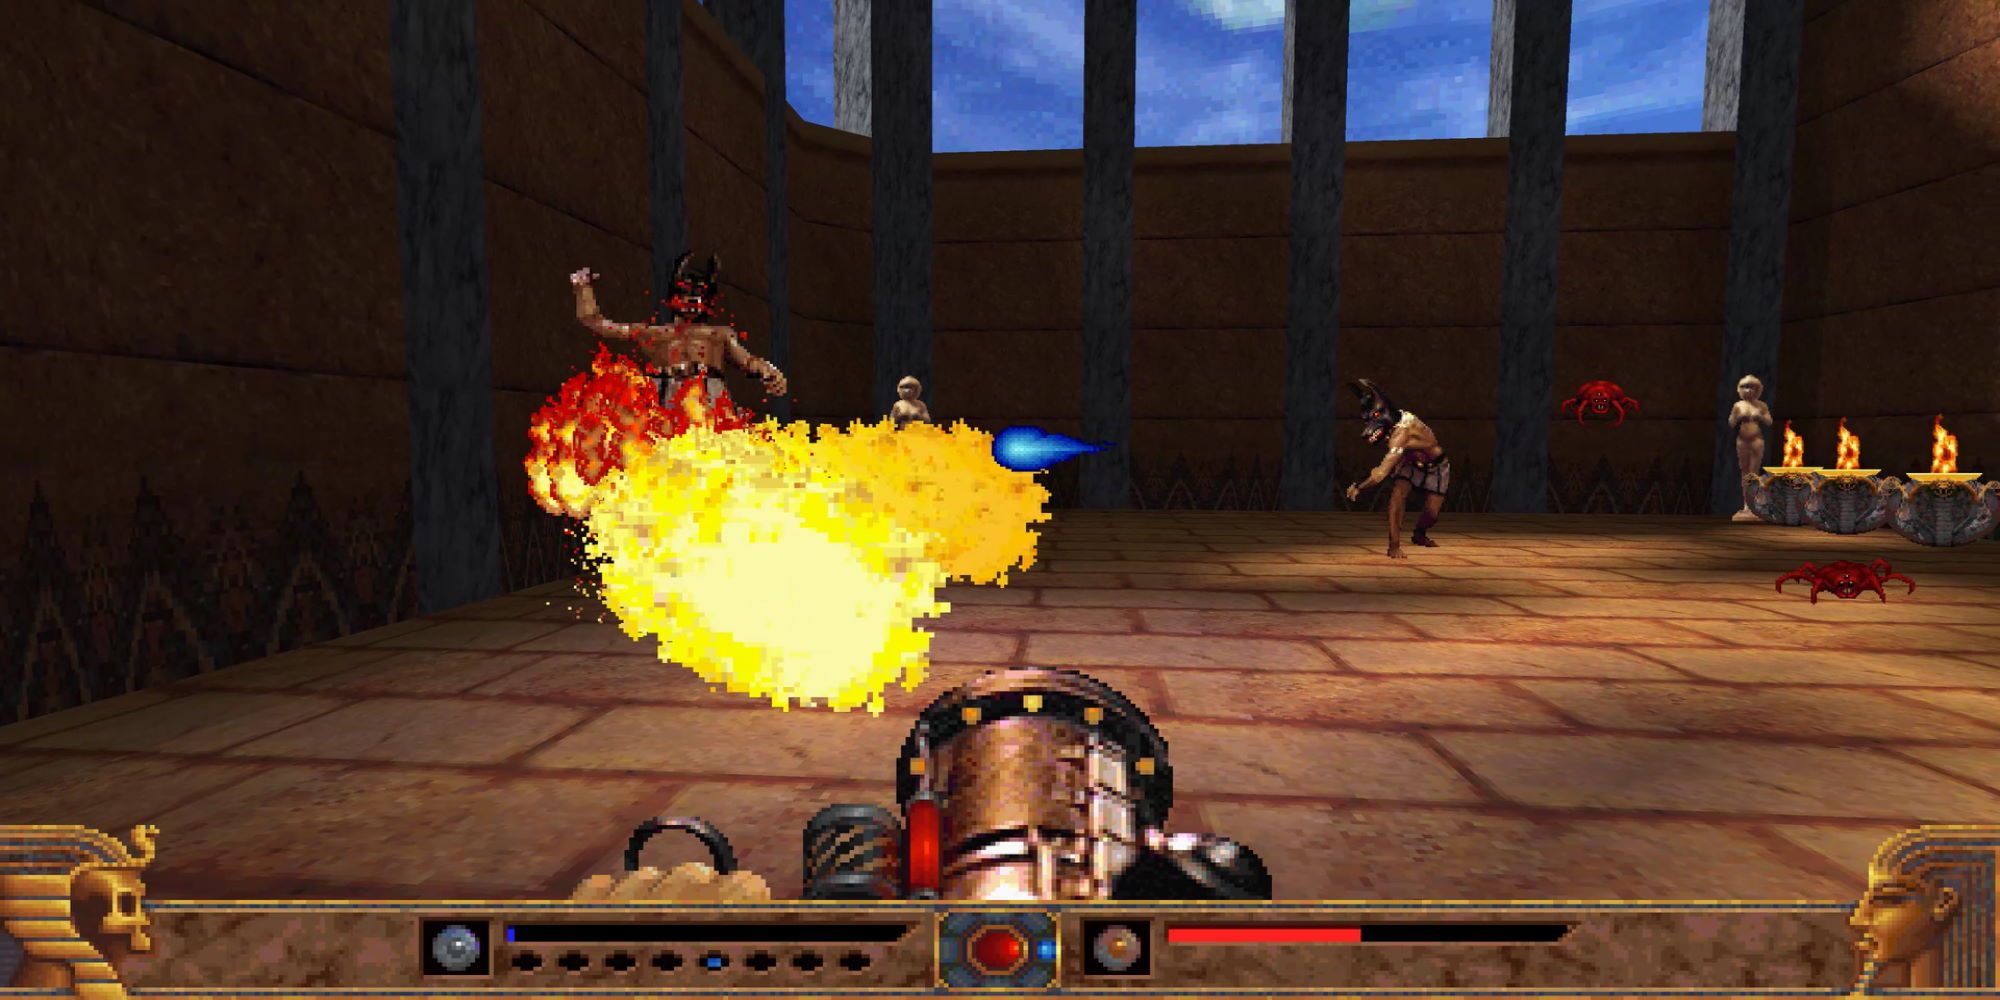 A flamethrower incinerating an enemy in an Egyptian-looking room, with an enemy and red spider nearby